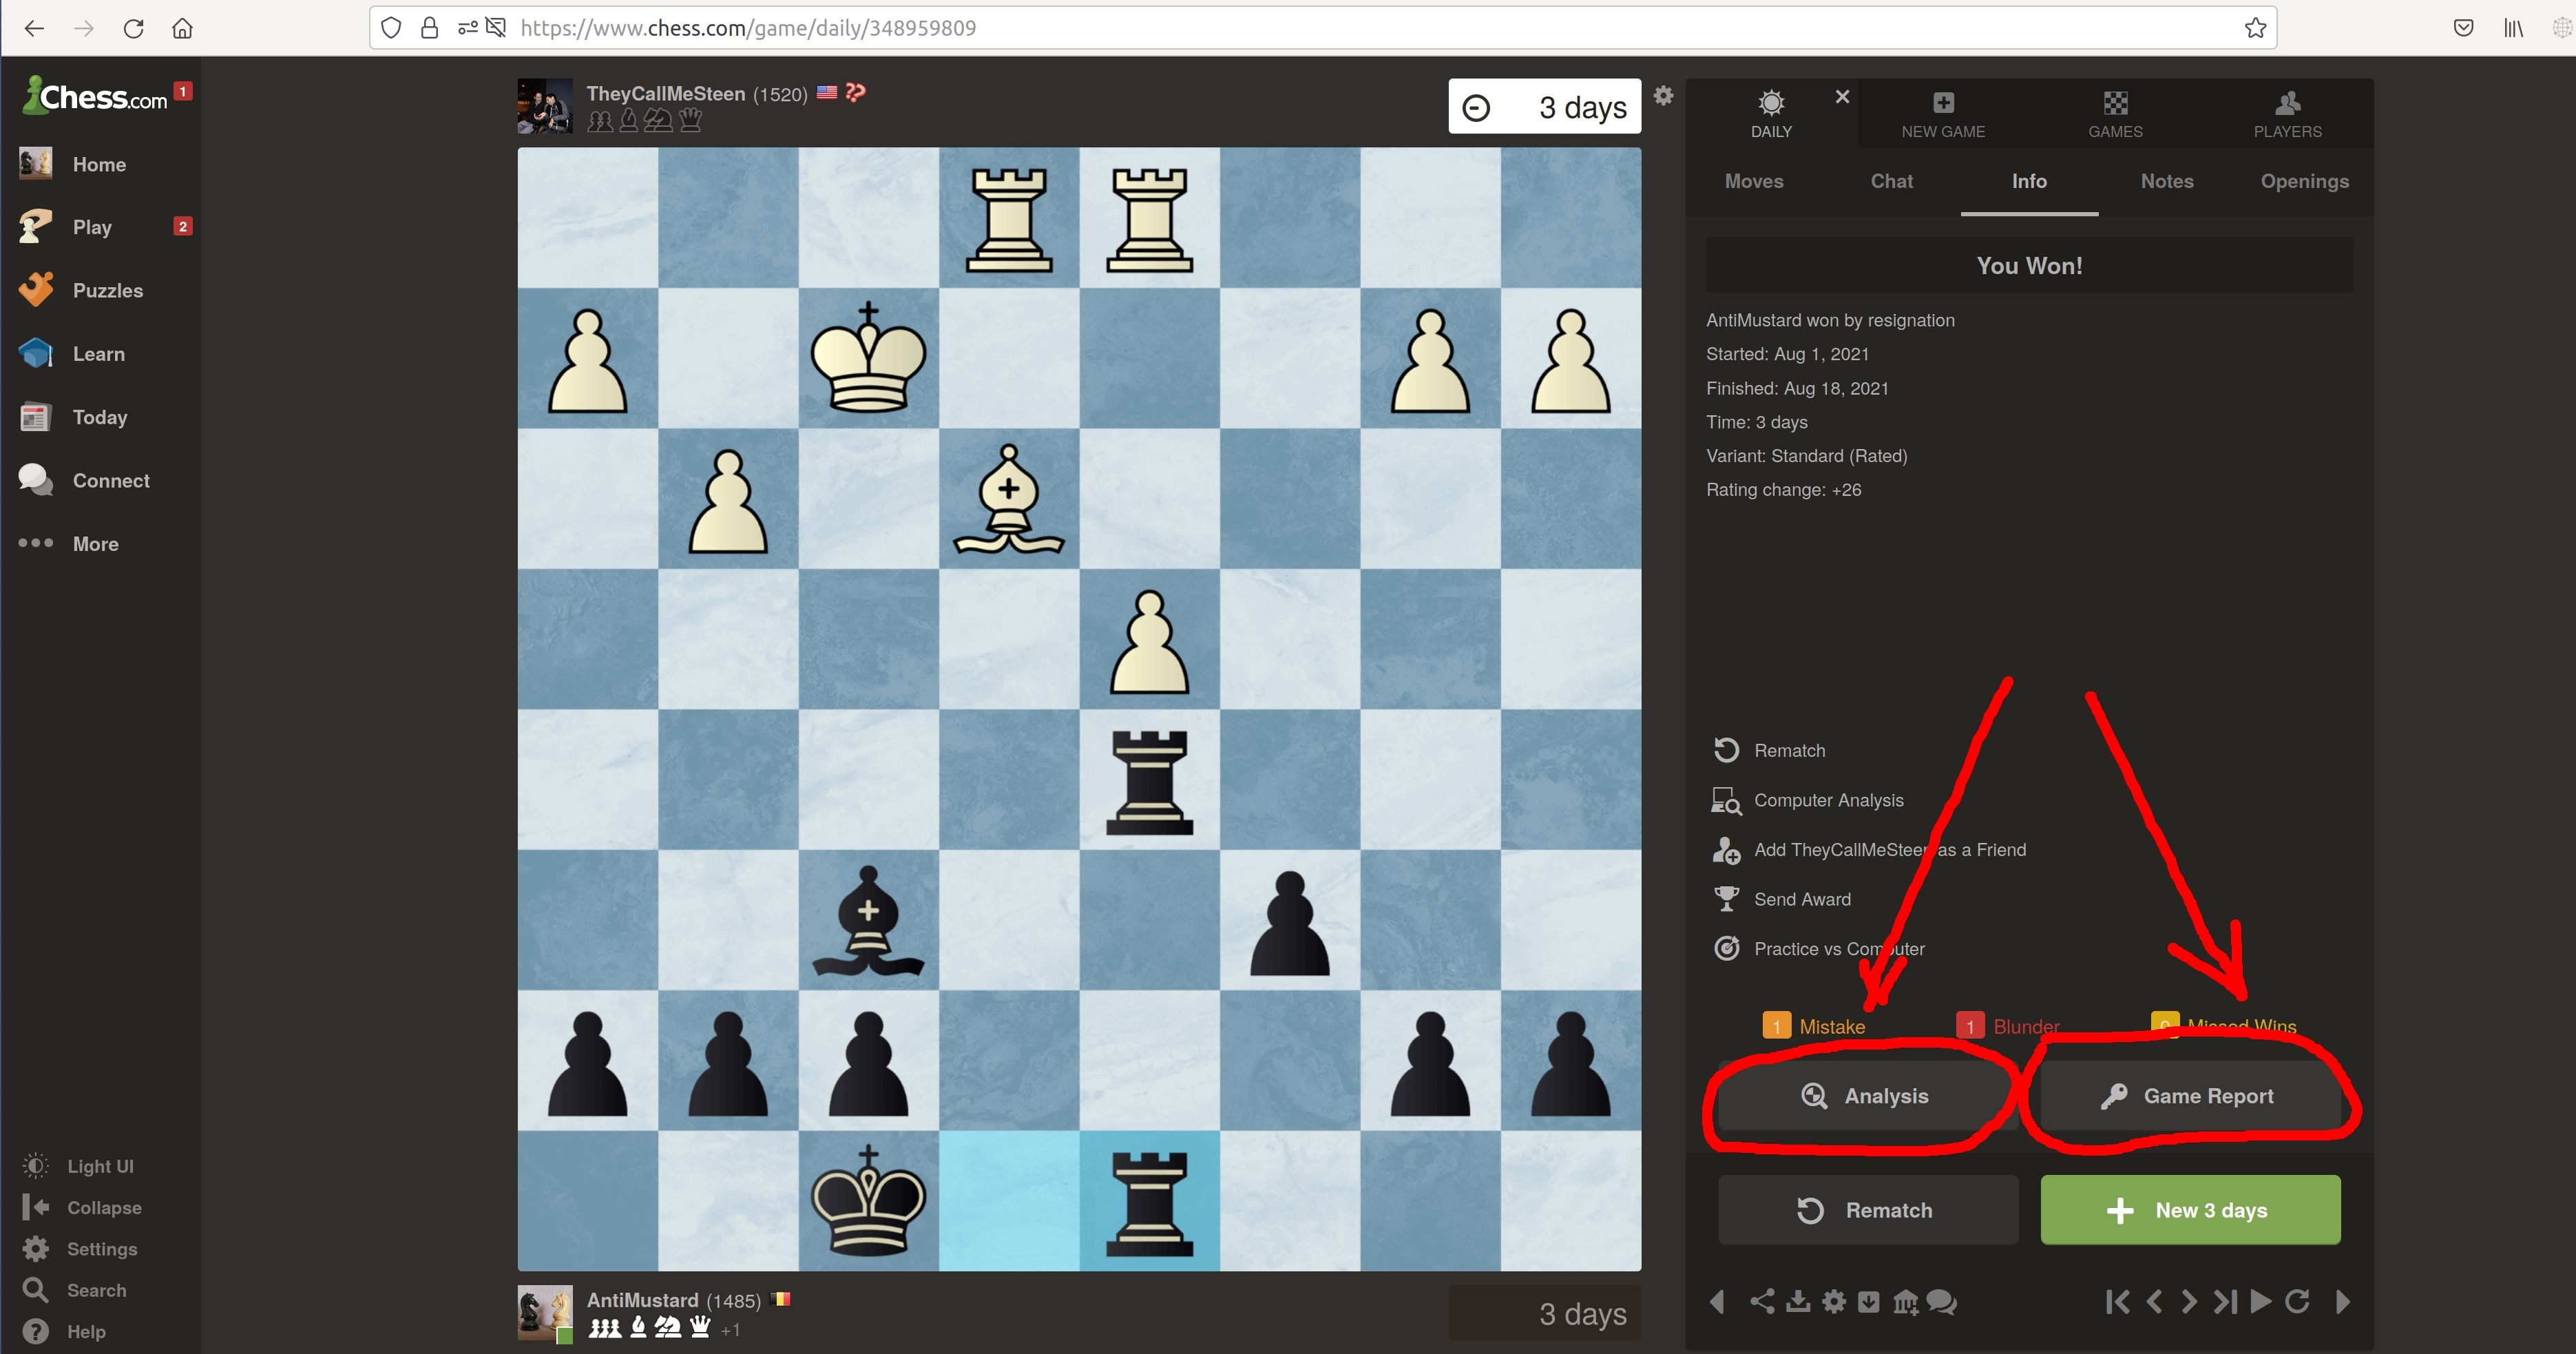 Game Analysis Not Giving Accuracy Percentages For this Game - Chess Forums  